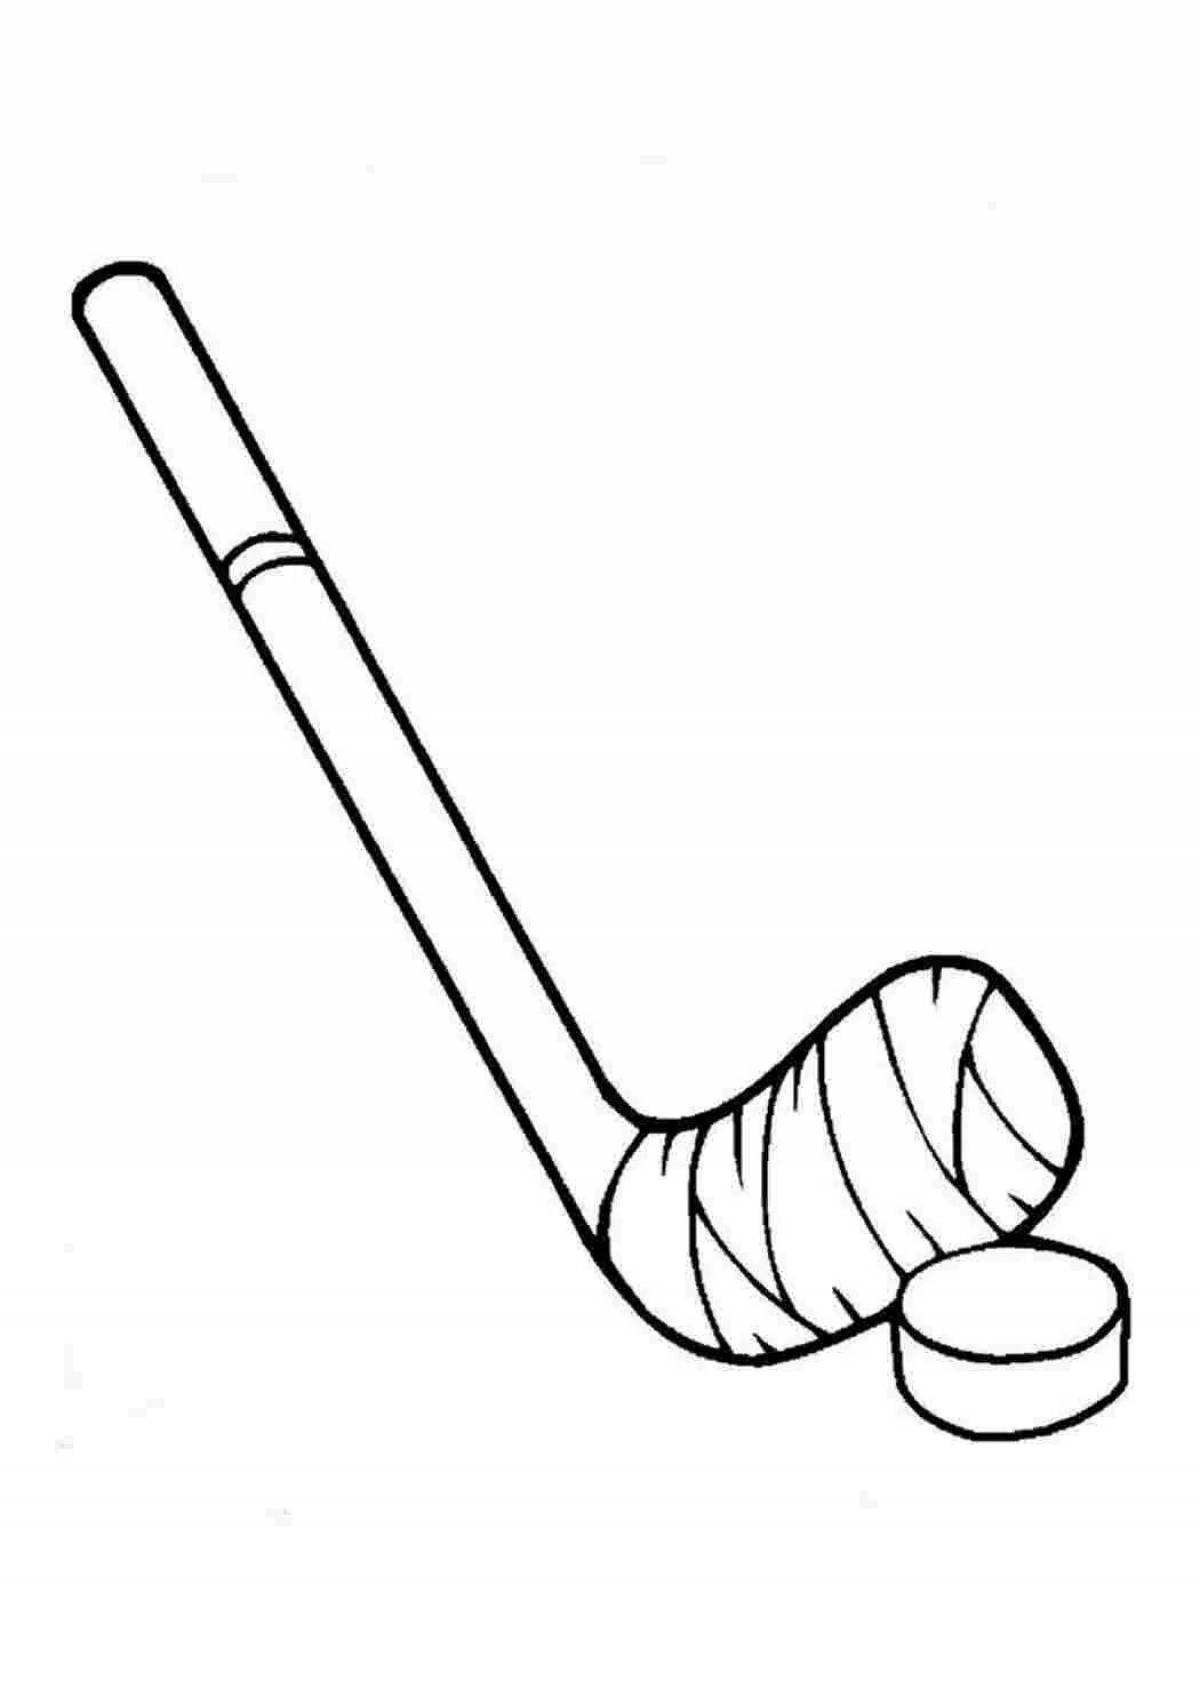 Innovative puck coloring page for kids